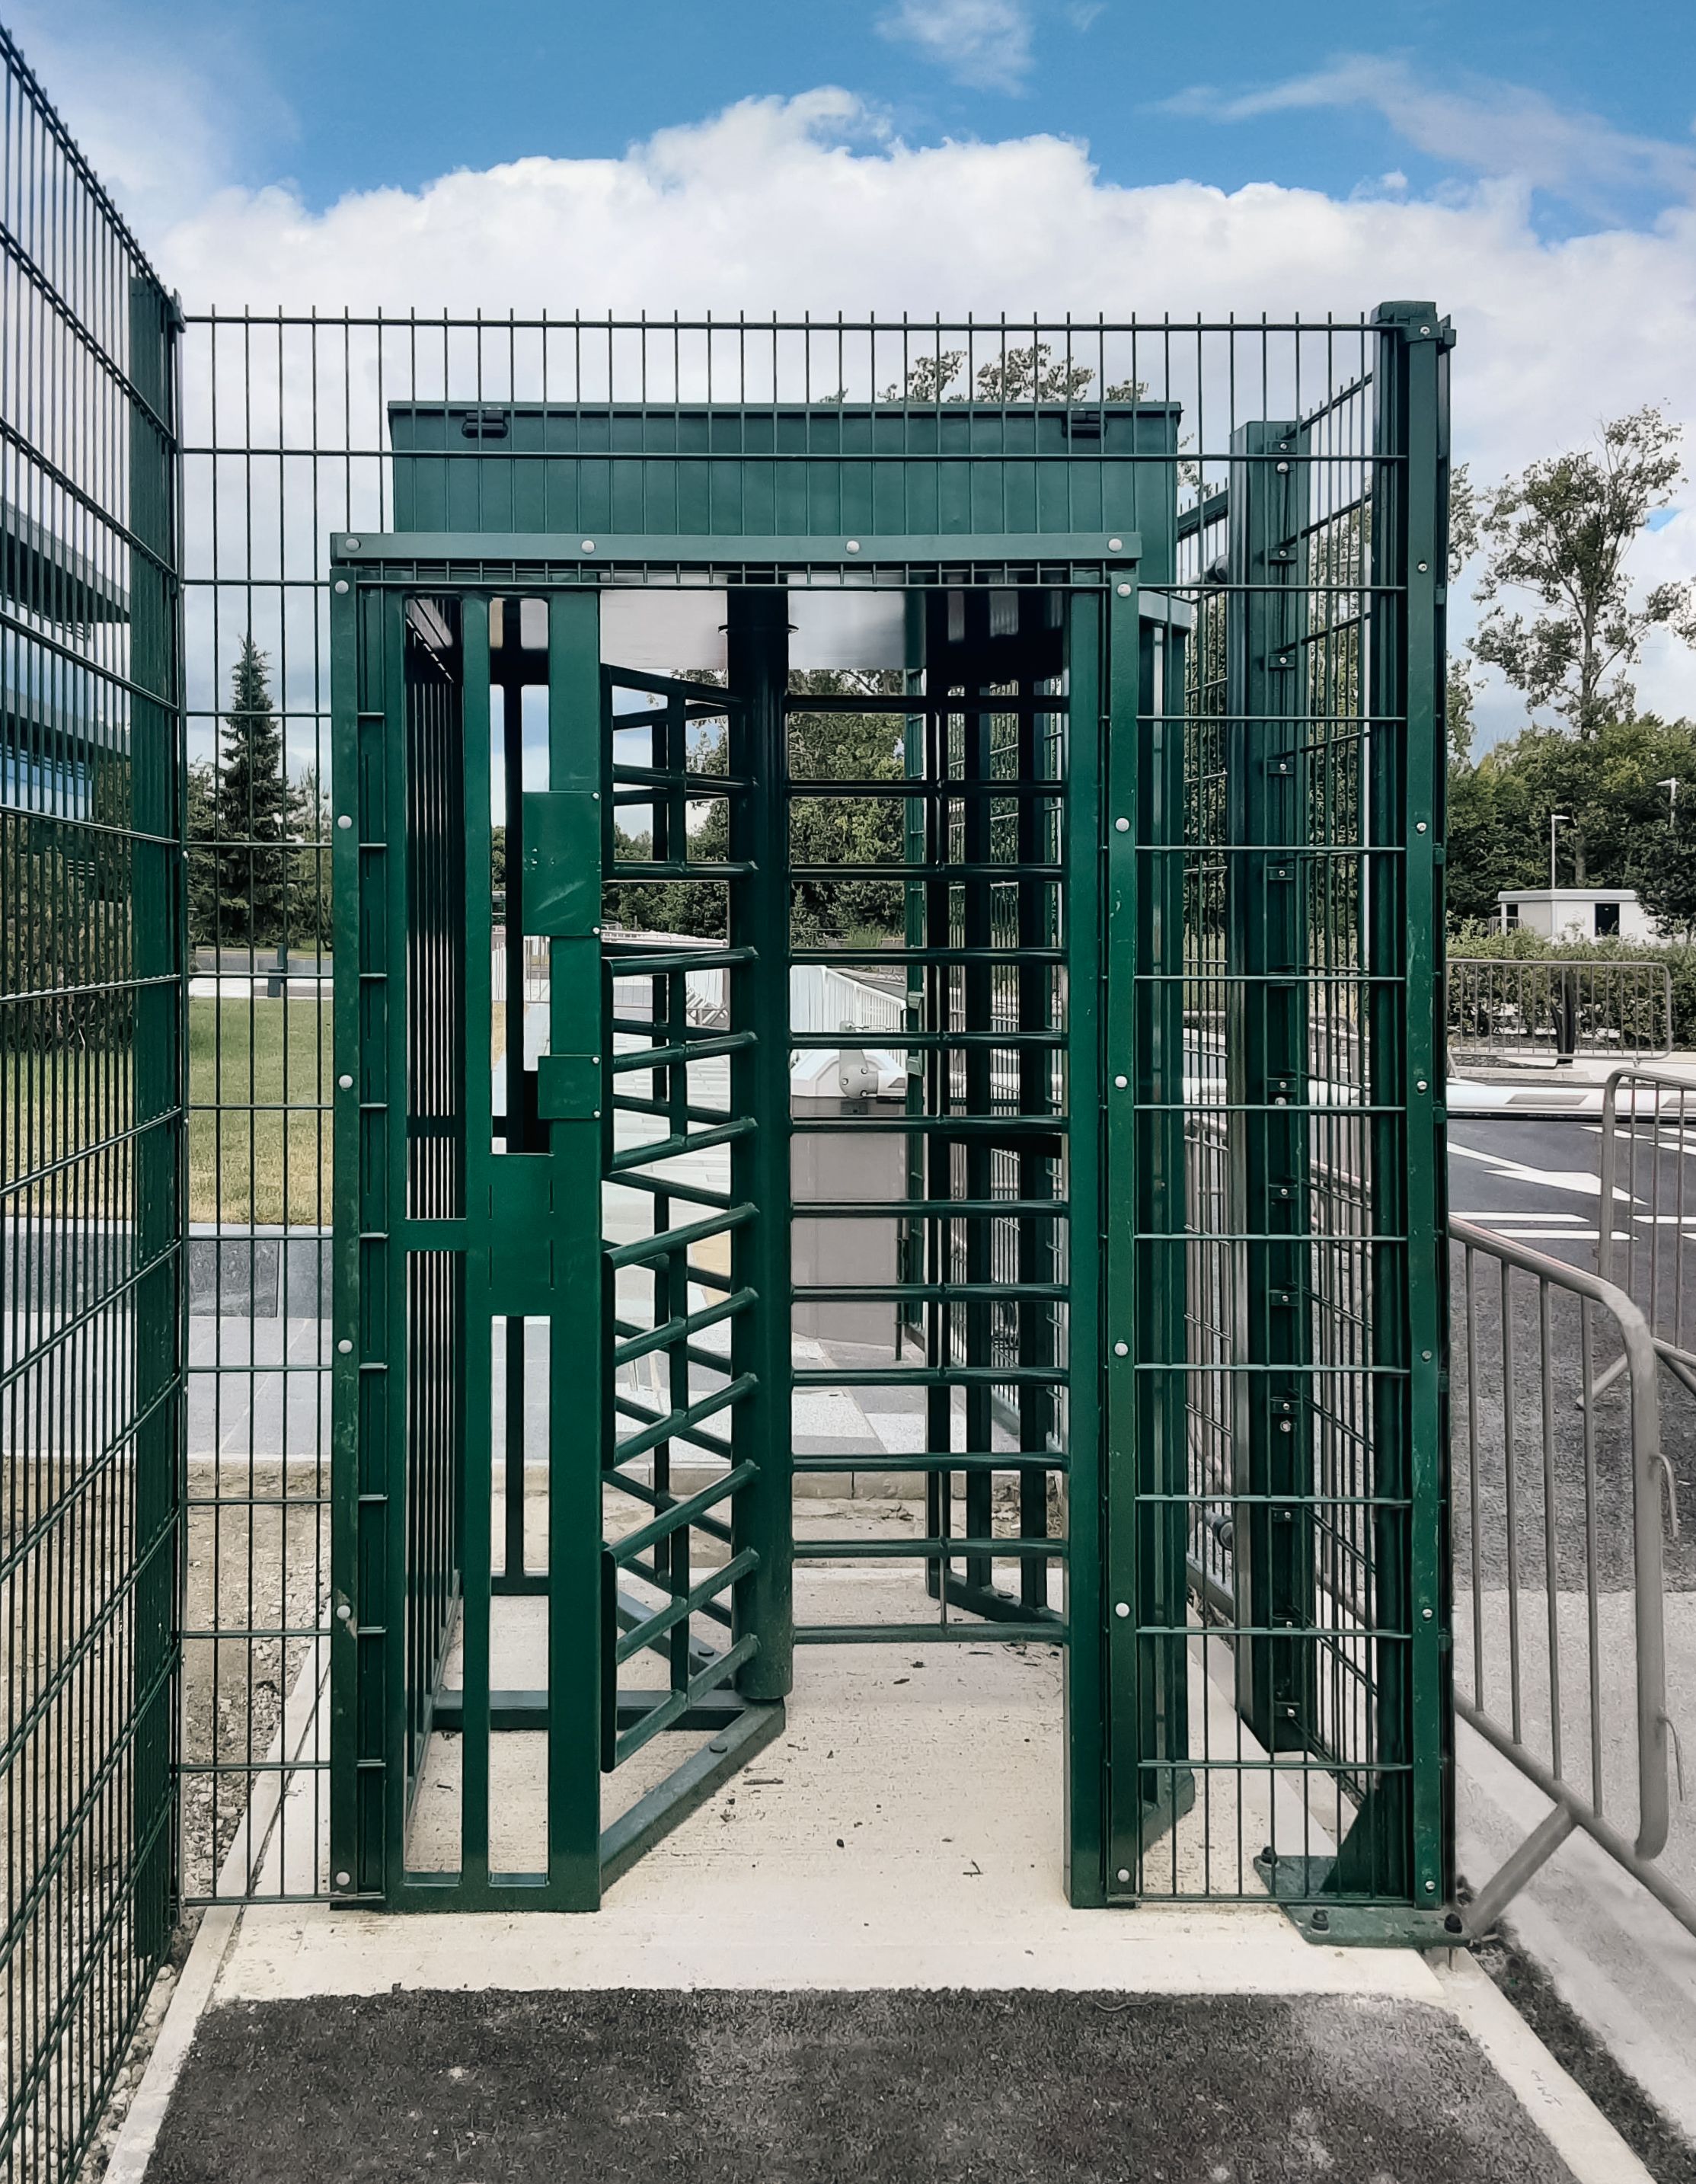 LPS1175 Product Testing - how did BRE's LPCB test our Platinum Turnstile B3